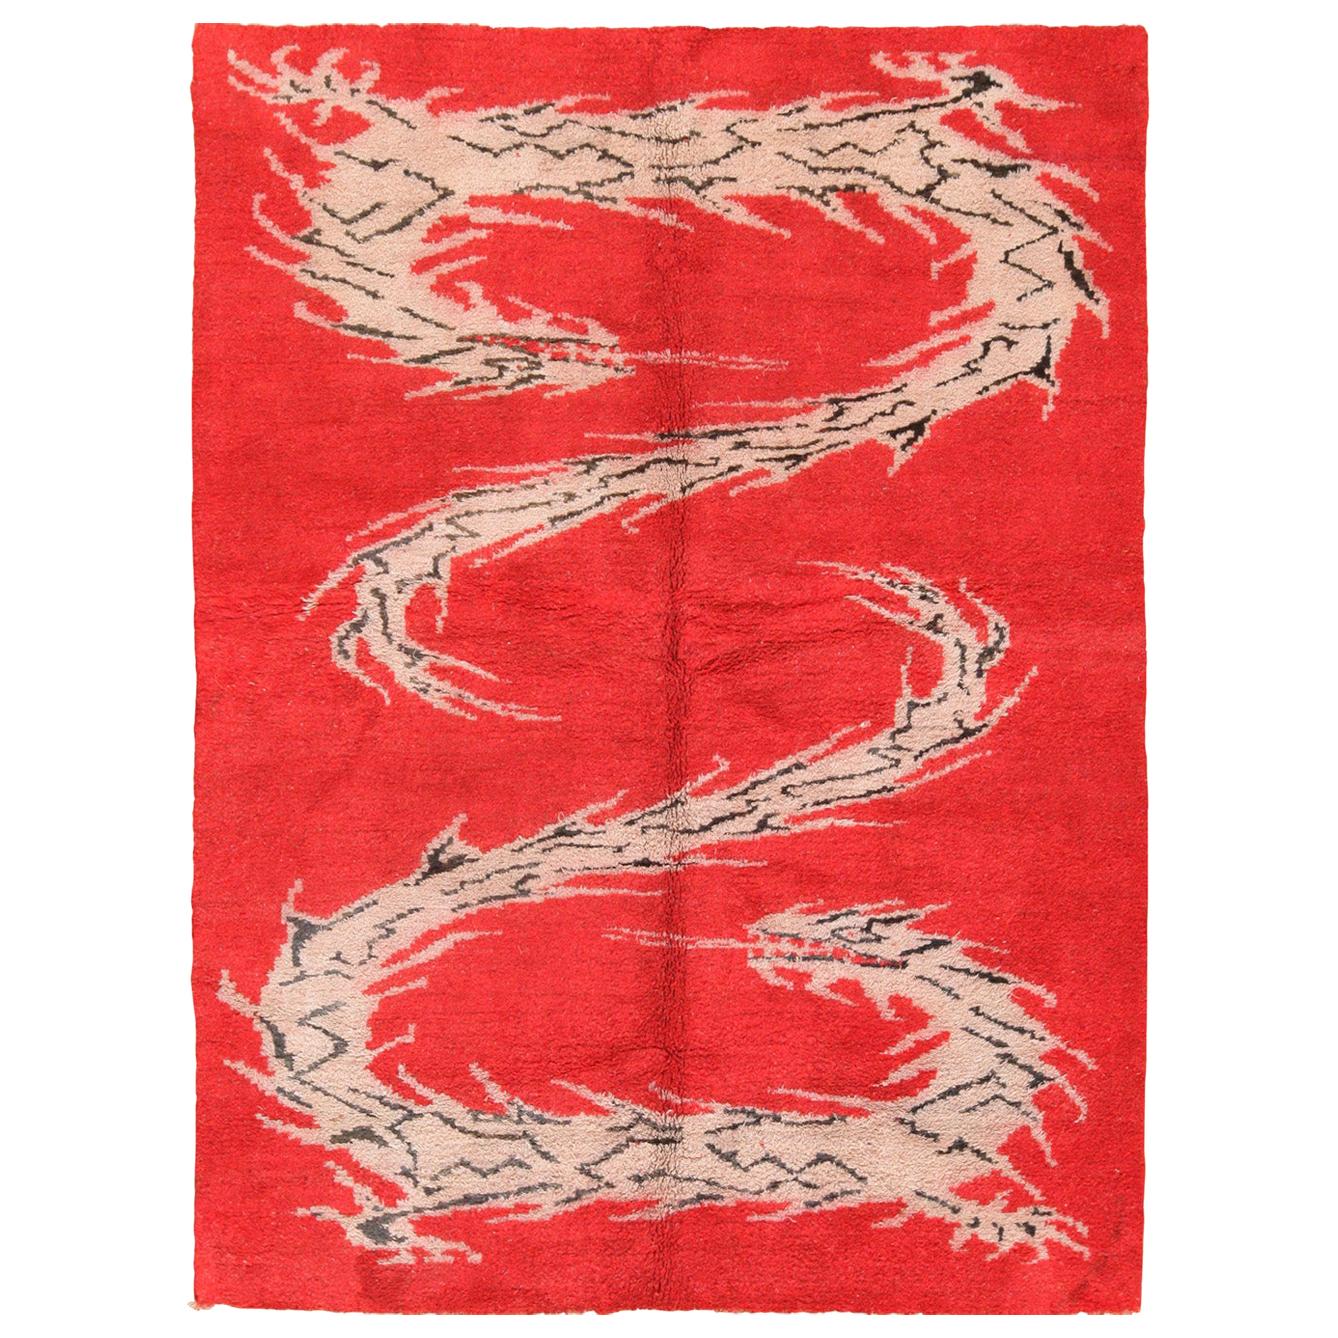 Antique Indian Dragon Design Rug. Size: 6 ft x 7 ft 10 in (1.83 m x 2.39 m)